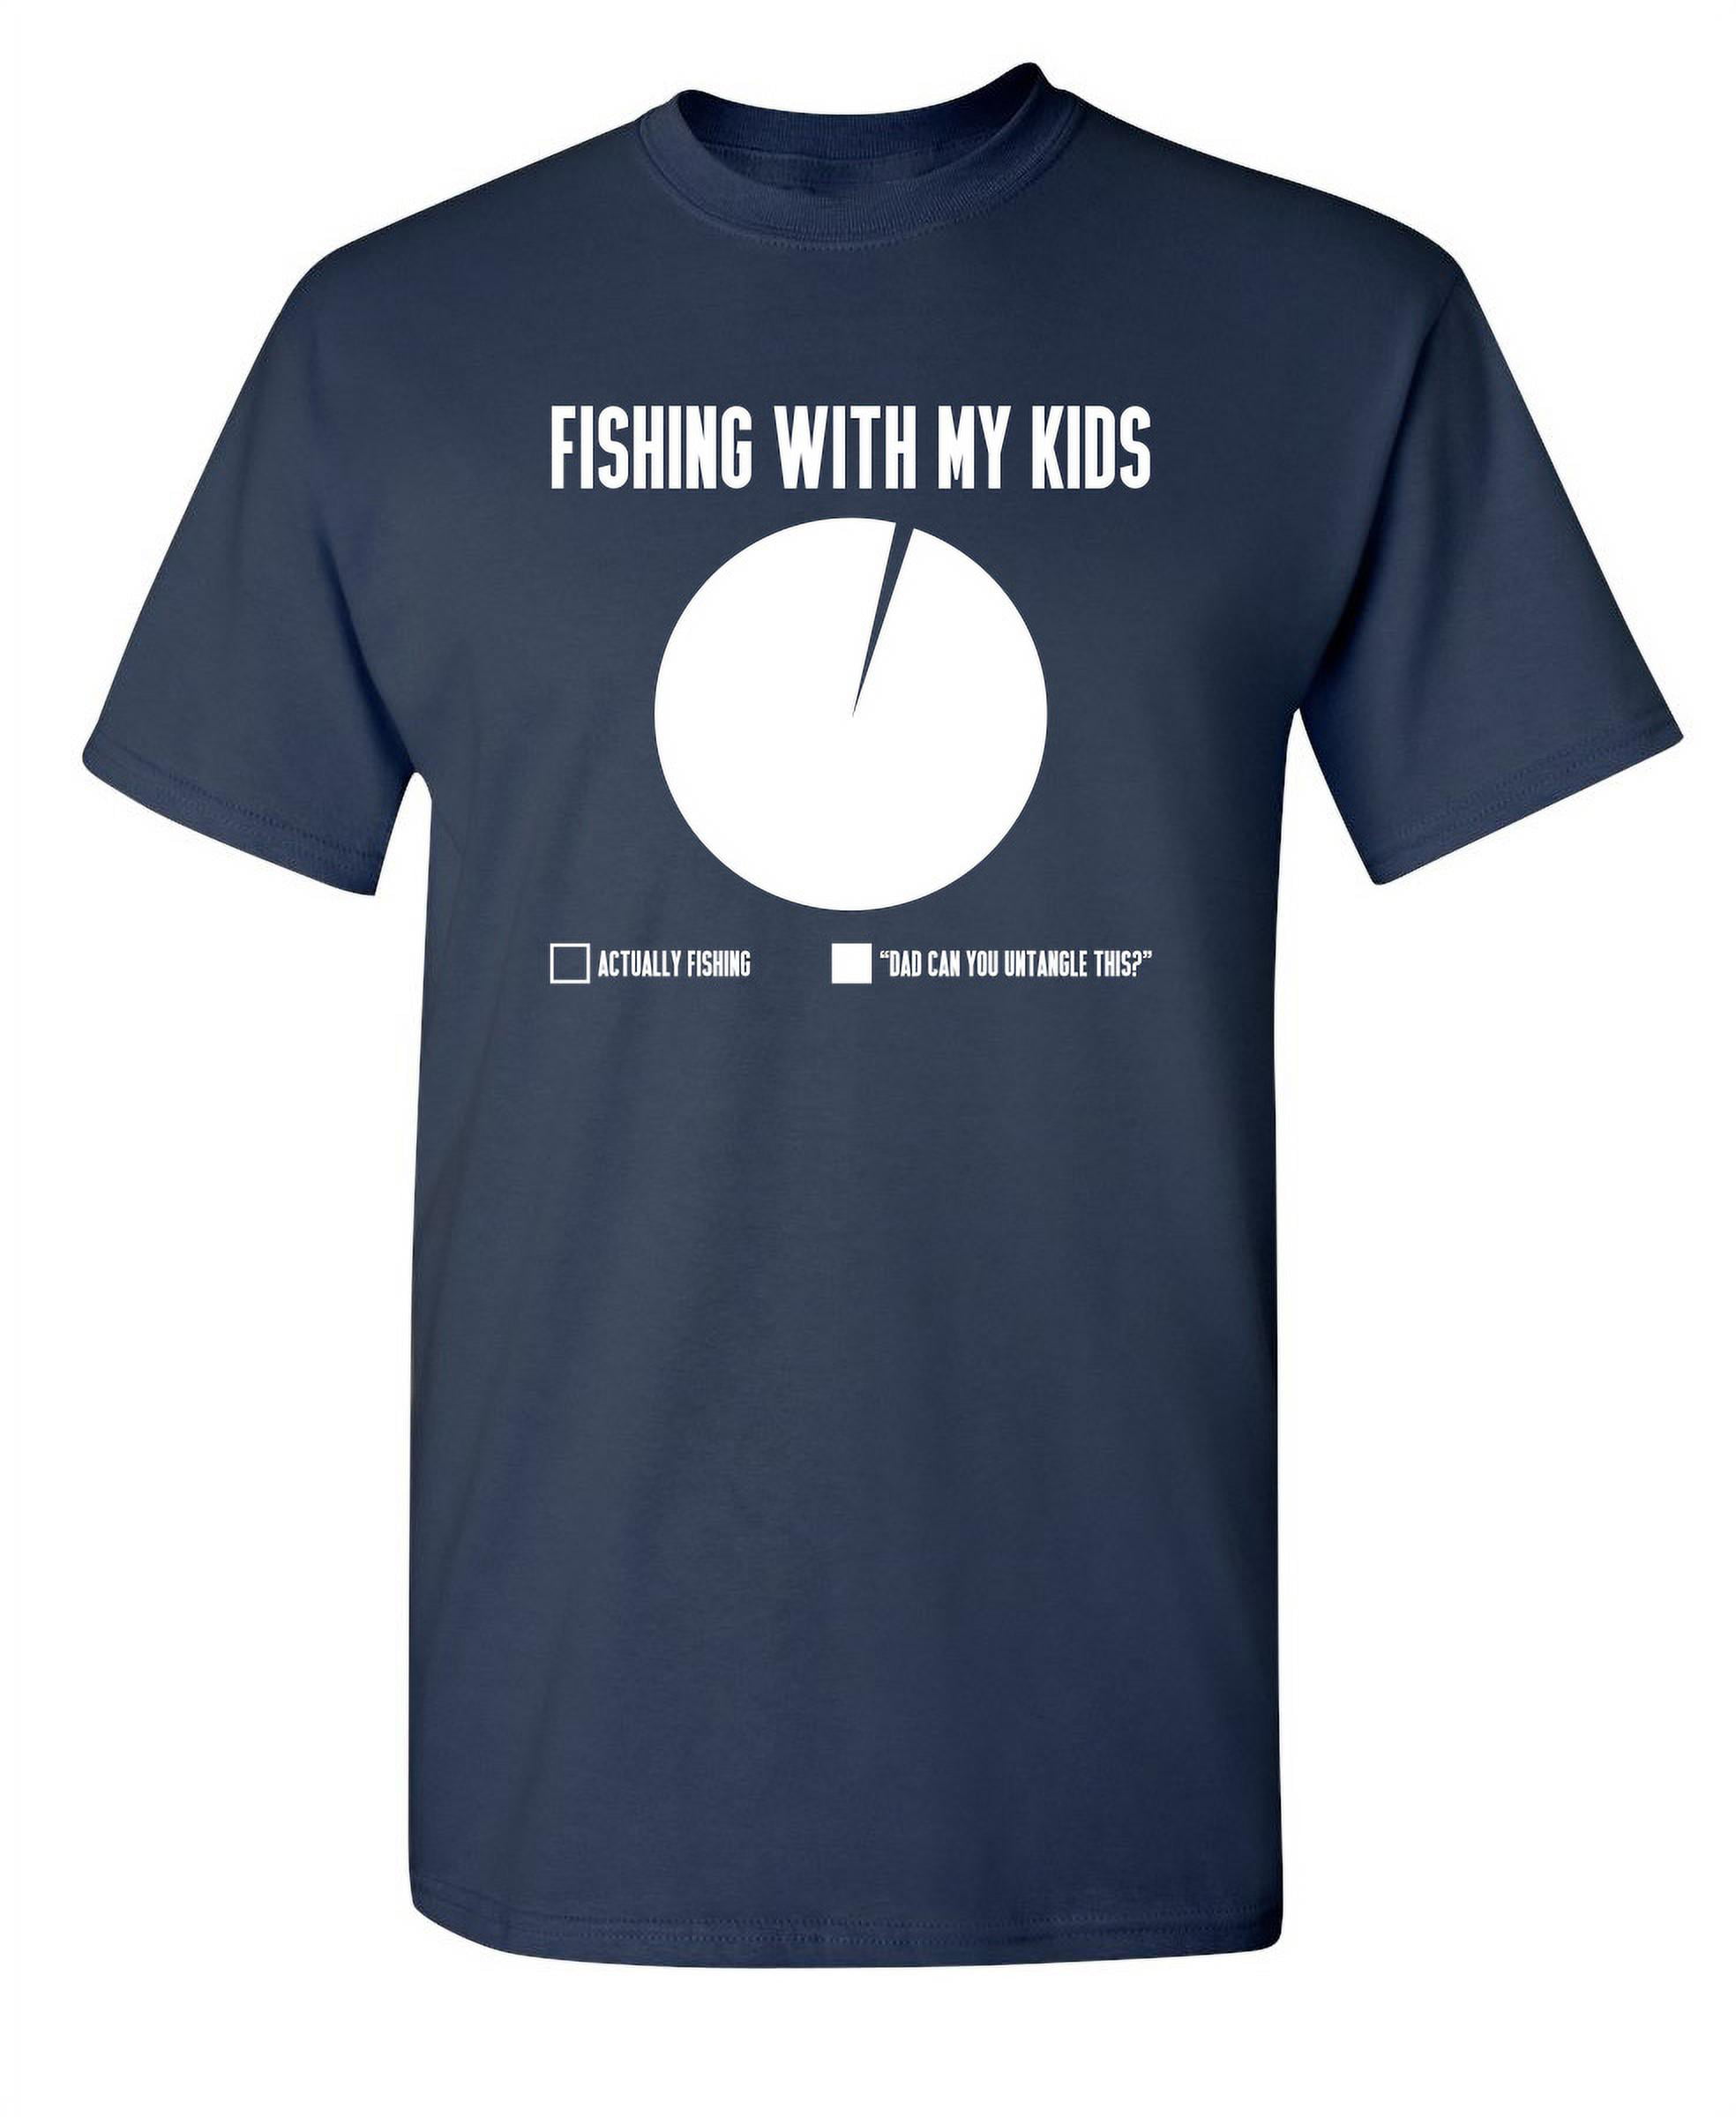 Fishing With My Kids Sarcastic Humor Graphic Novelty Funny Youth T Shirt 